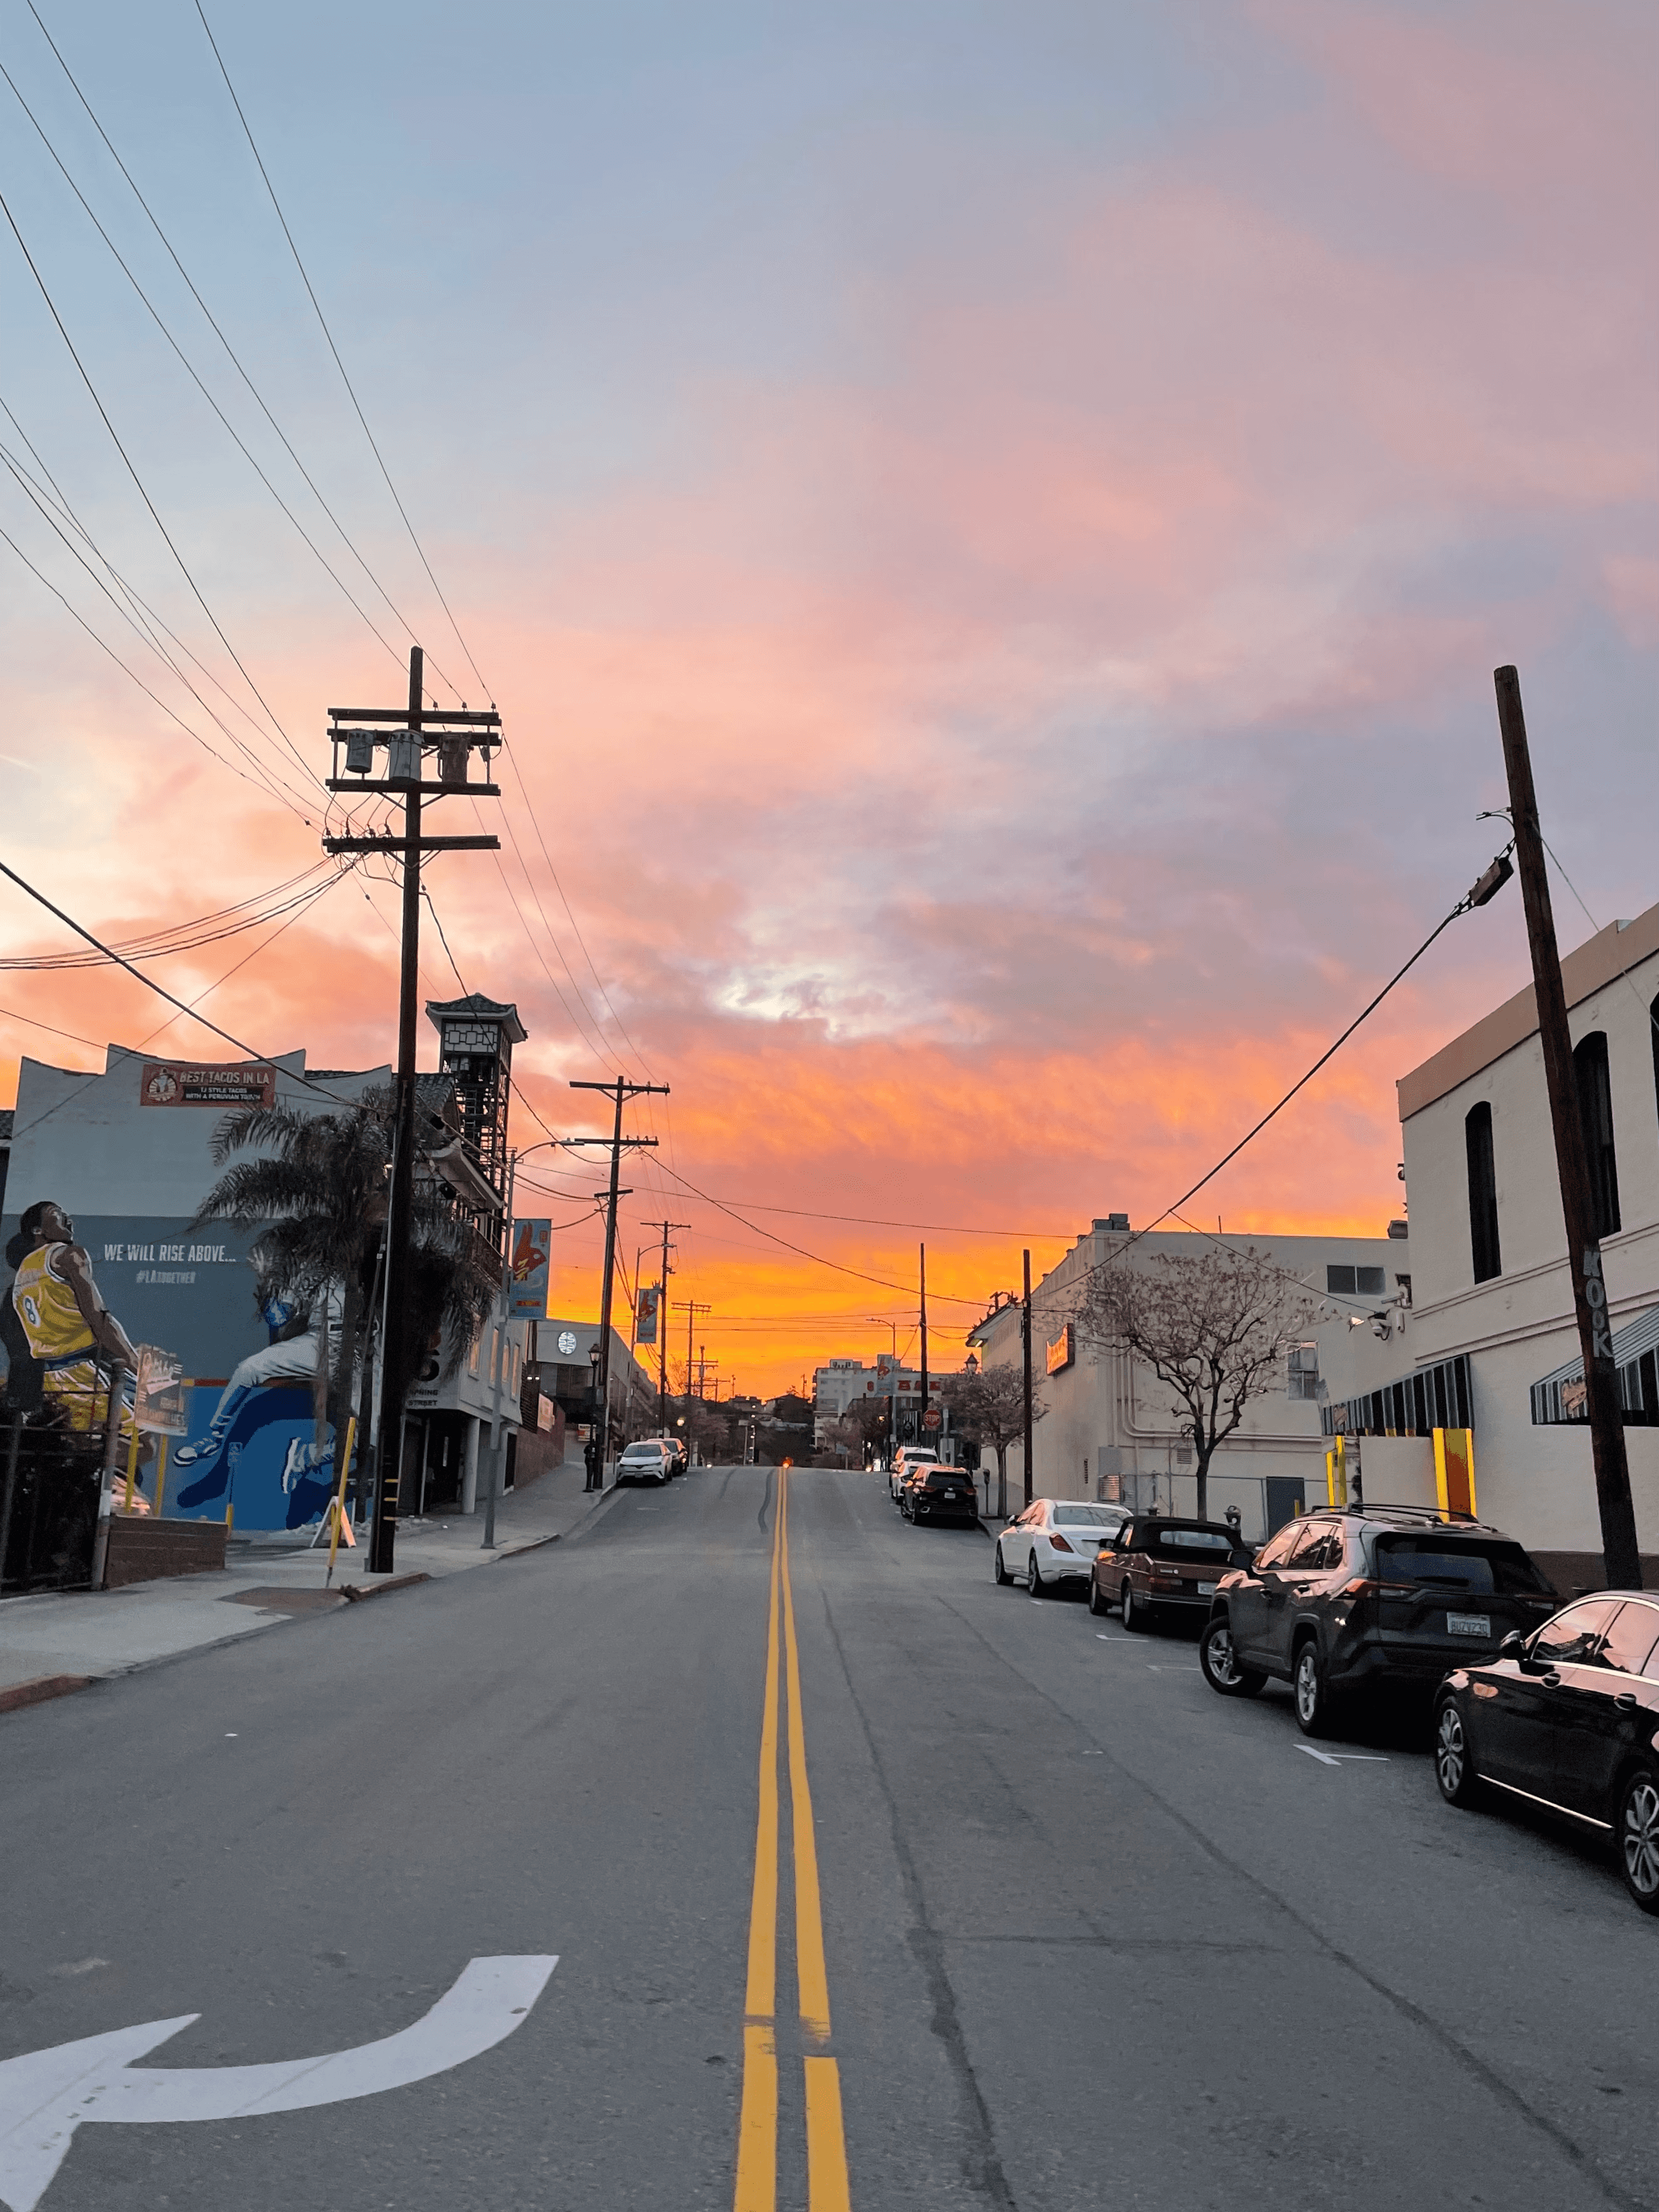 Sunset while crossing a street in Chinatown